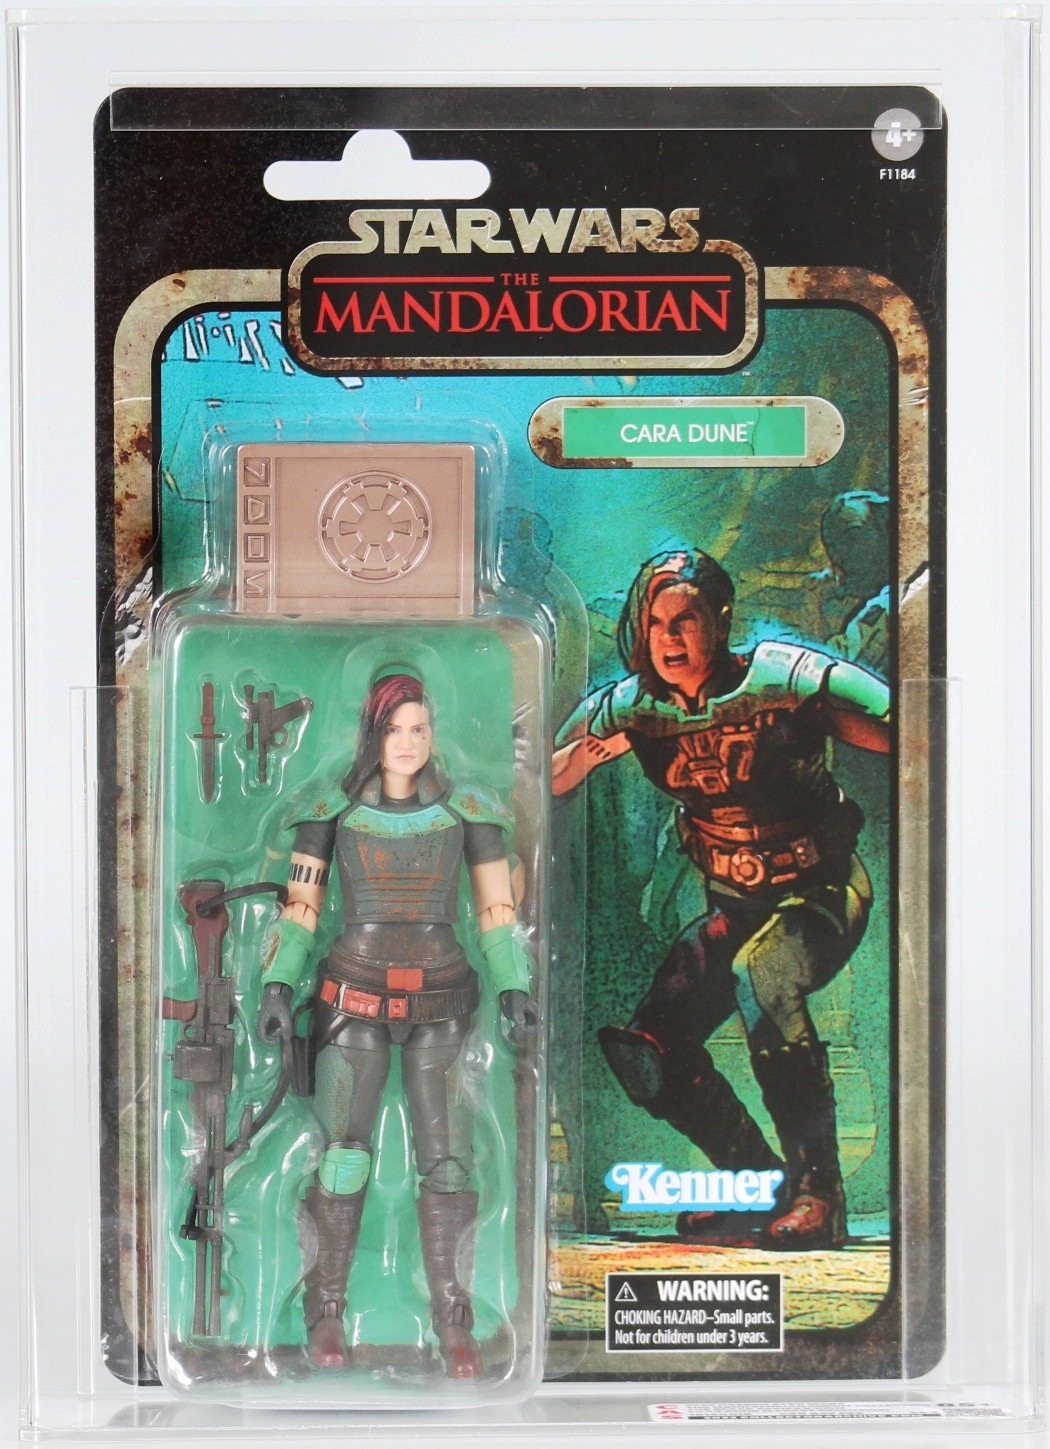 Found At Target – Exclusive The Black Series 6-Inch Mandalorian